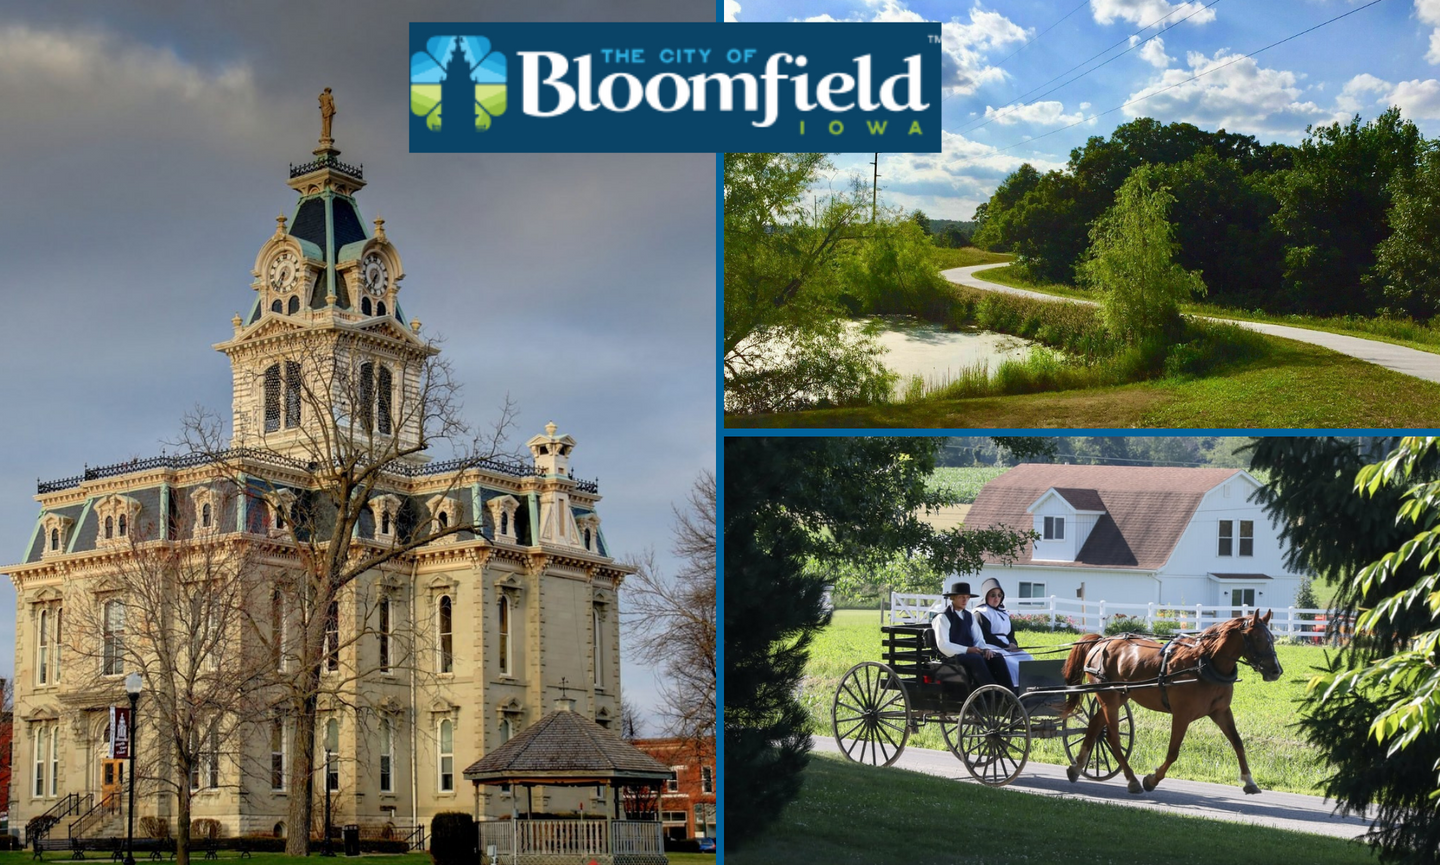 Bloomfield is home to many sights, sounds and experiences that you simply can’t find anywhere else.